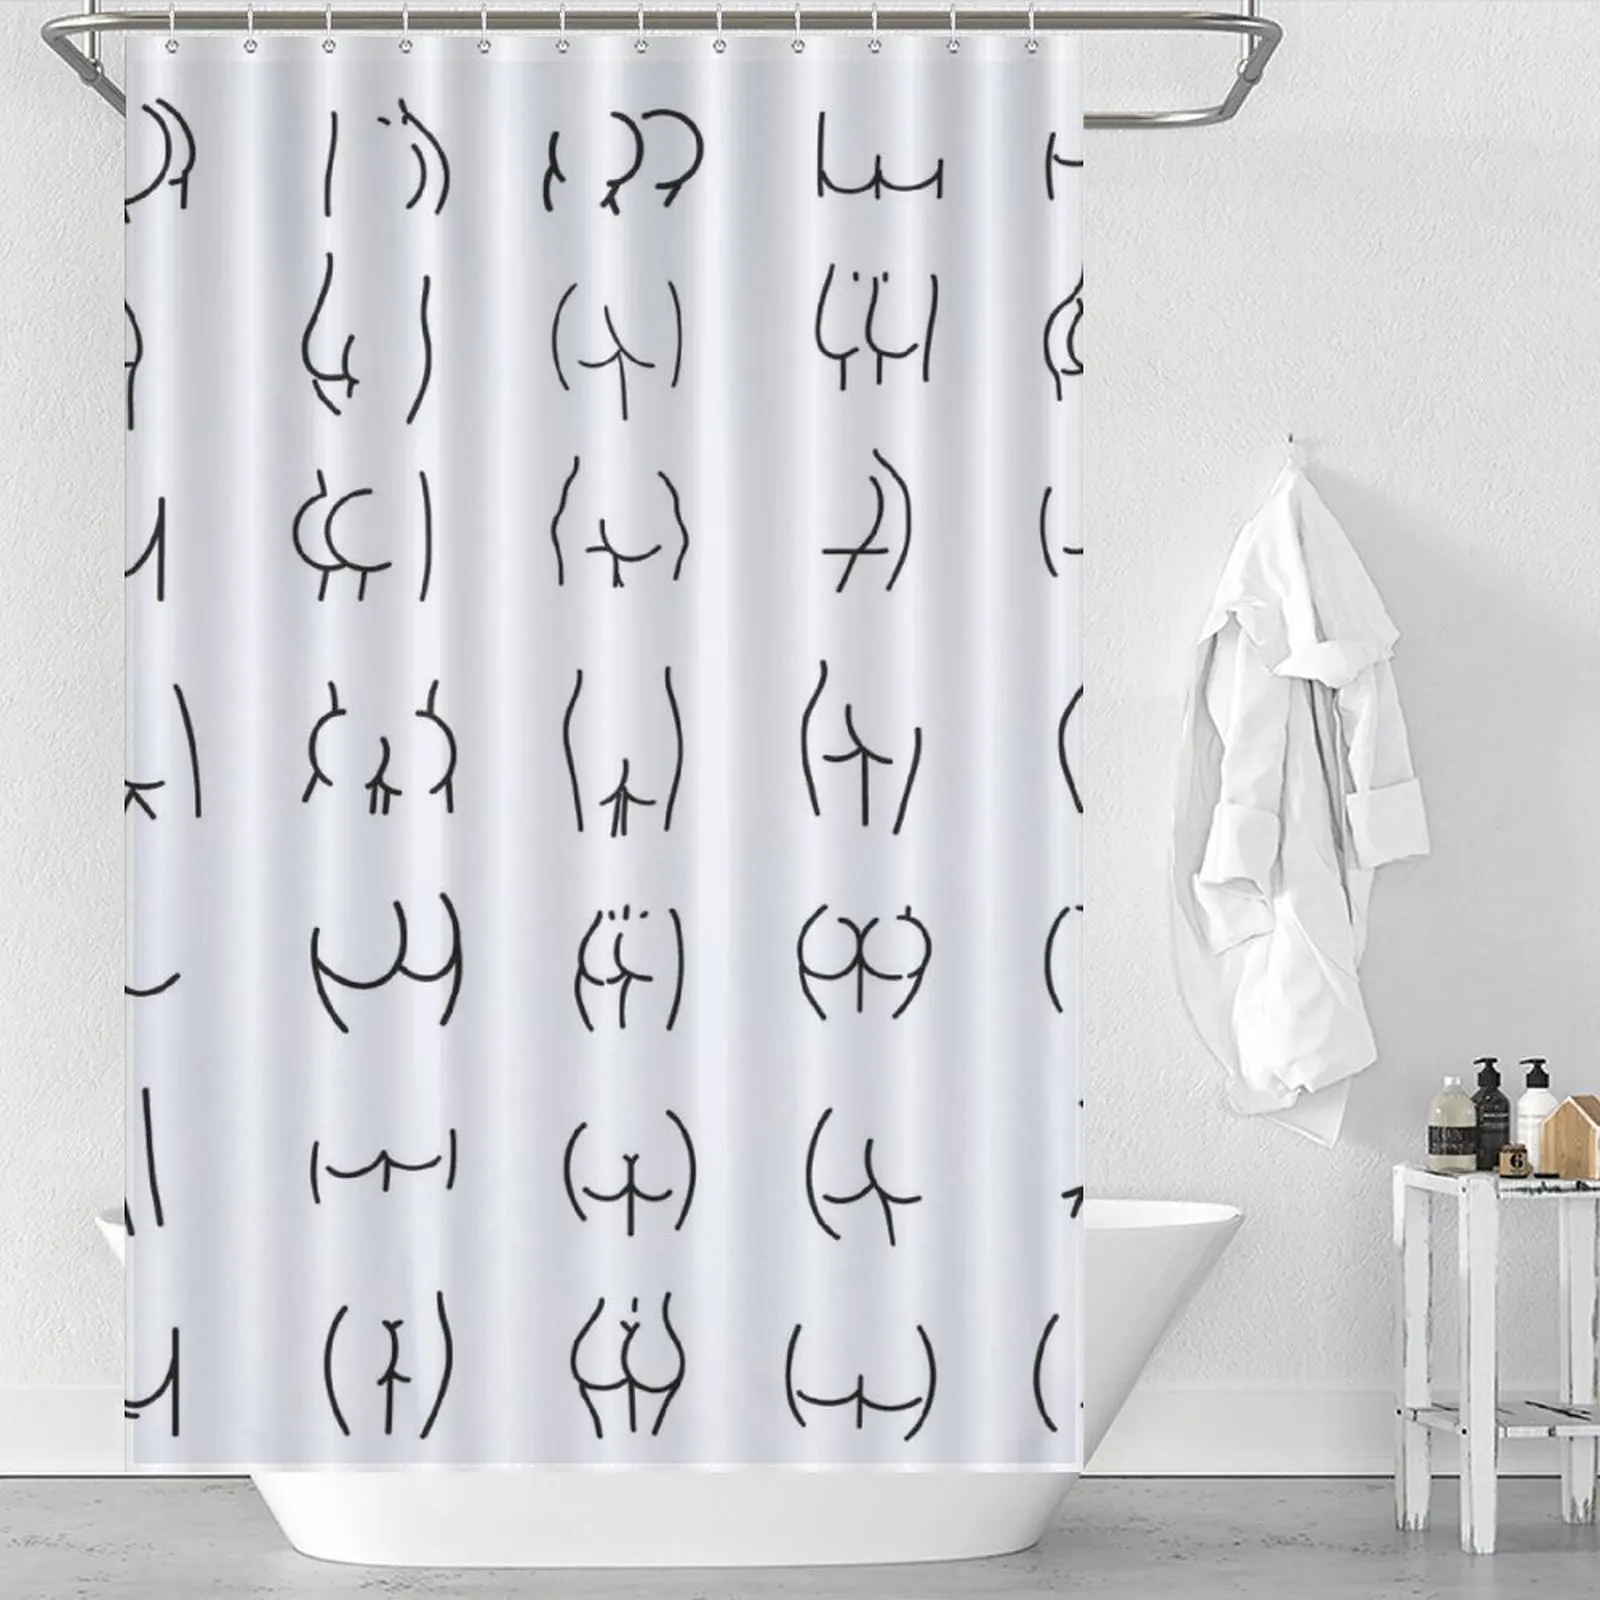 A white shower curtain with black and white drawings on it.